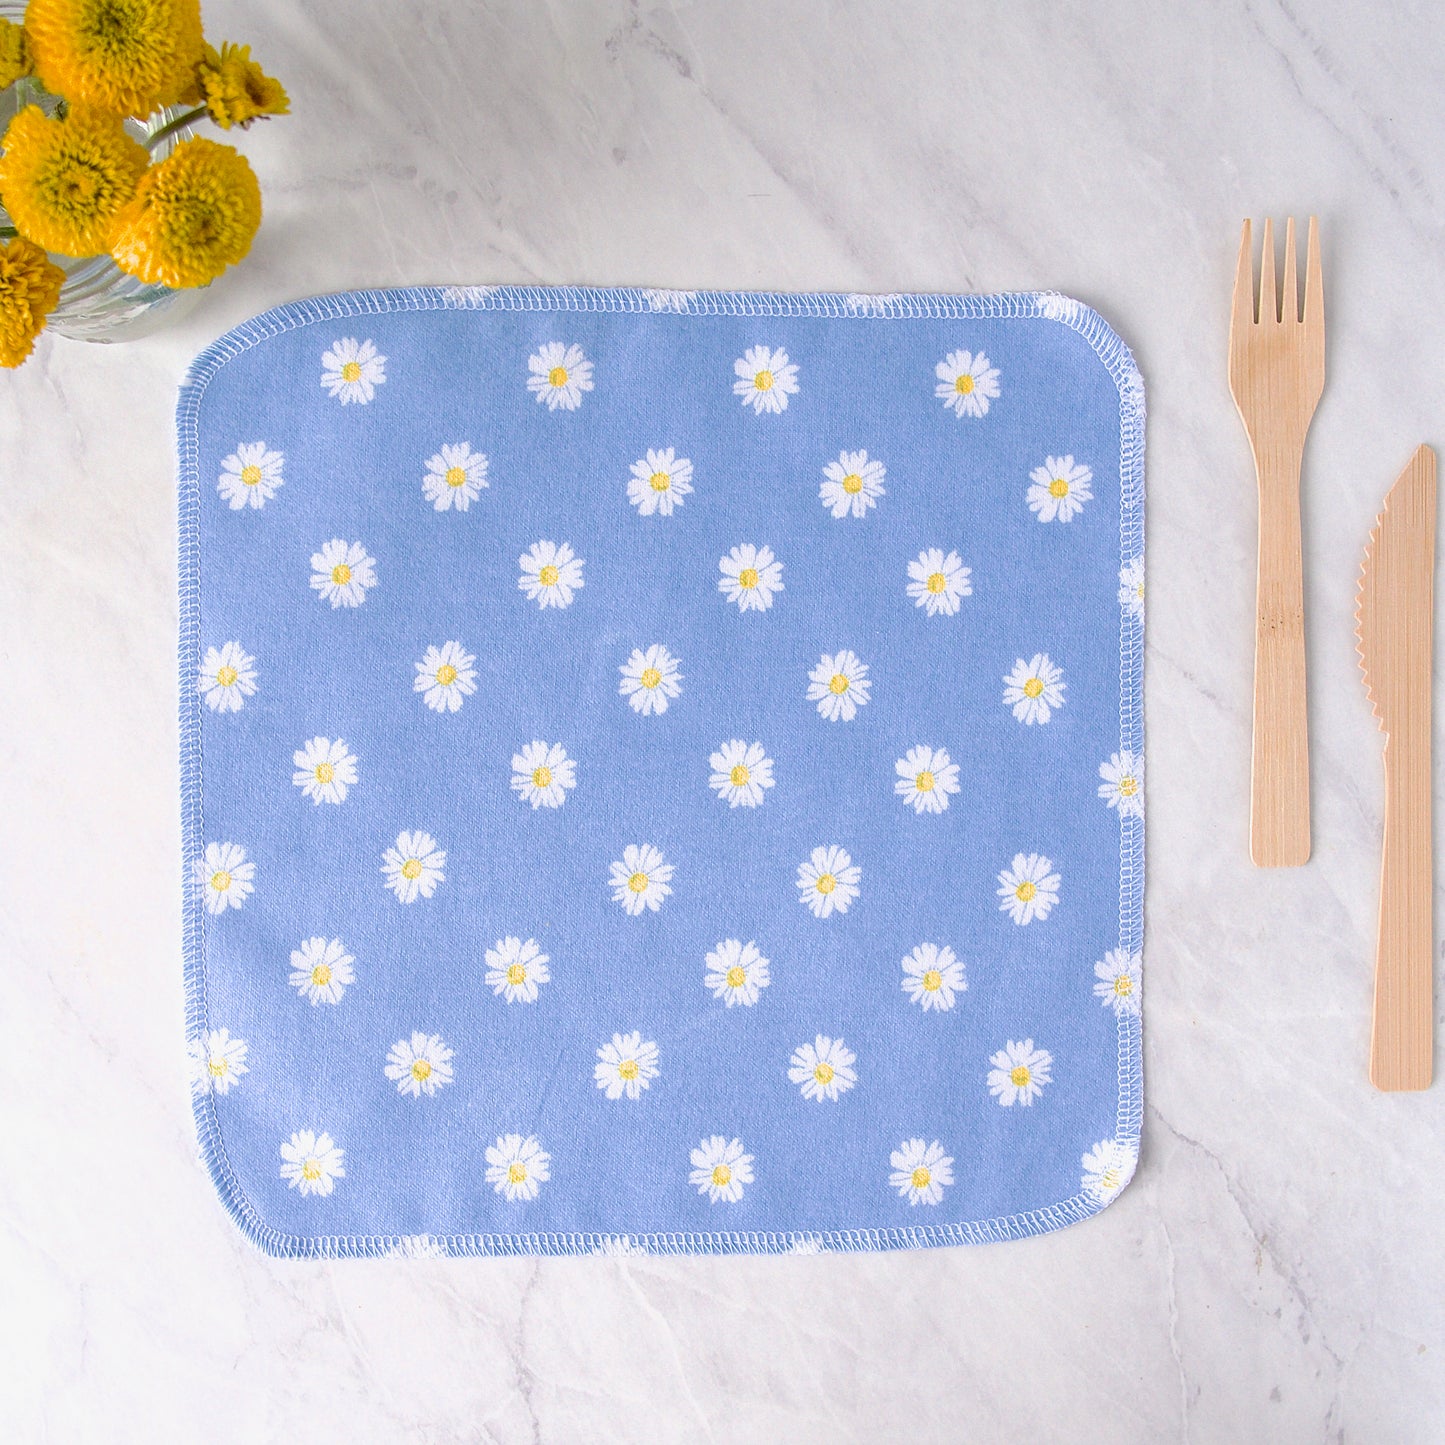 Reusable Cloth Napkins in Blue and White Daisies